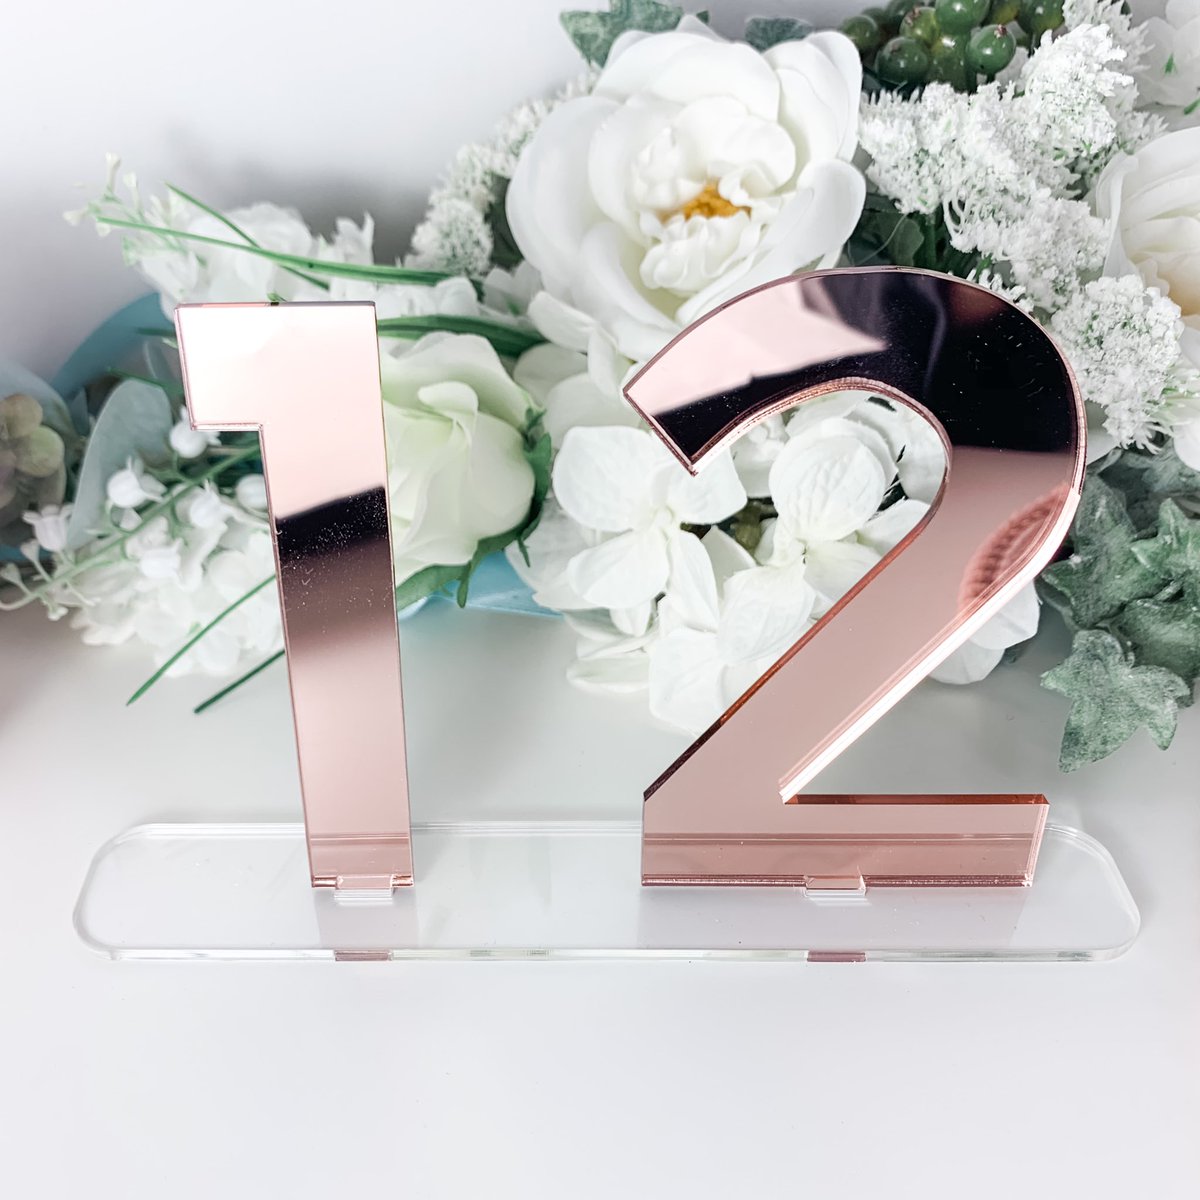 💕R E L A X E D  G L A M 💕
Your weekend dose of our new in and relaxed but glamorous table numbers.
weddinglux.co.uk/collections/ta…

#tableware #eventdecor #tabledecorations #tablenumbers #eventdesign #eventplanner #tabledecor #weddinginspiration #weddingtablenumbers #weddingtabledecor